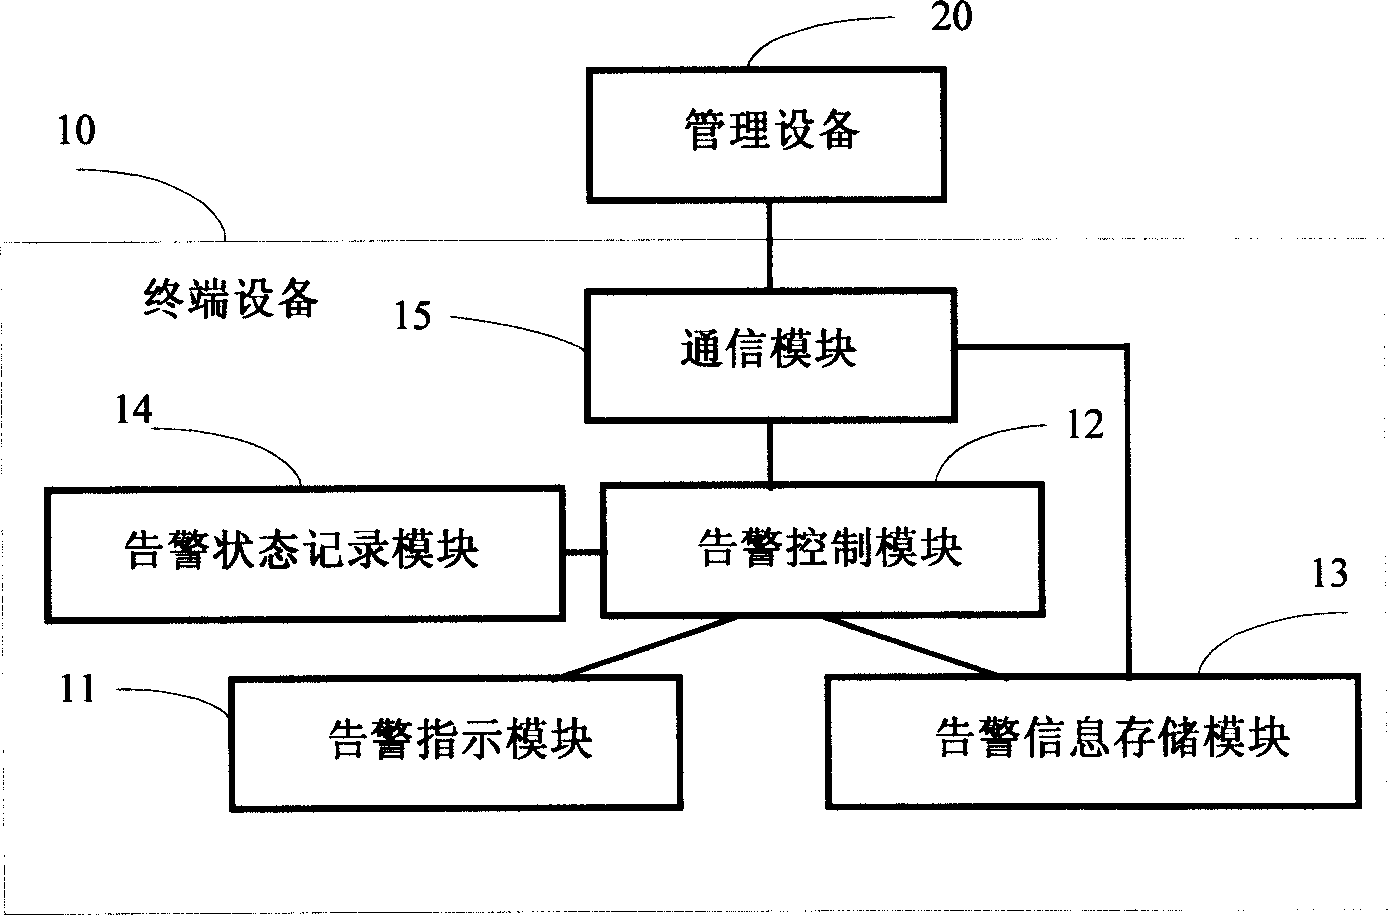 Method and system for realizing alarm of telecommunication network